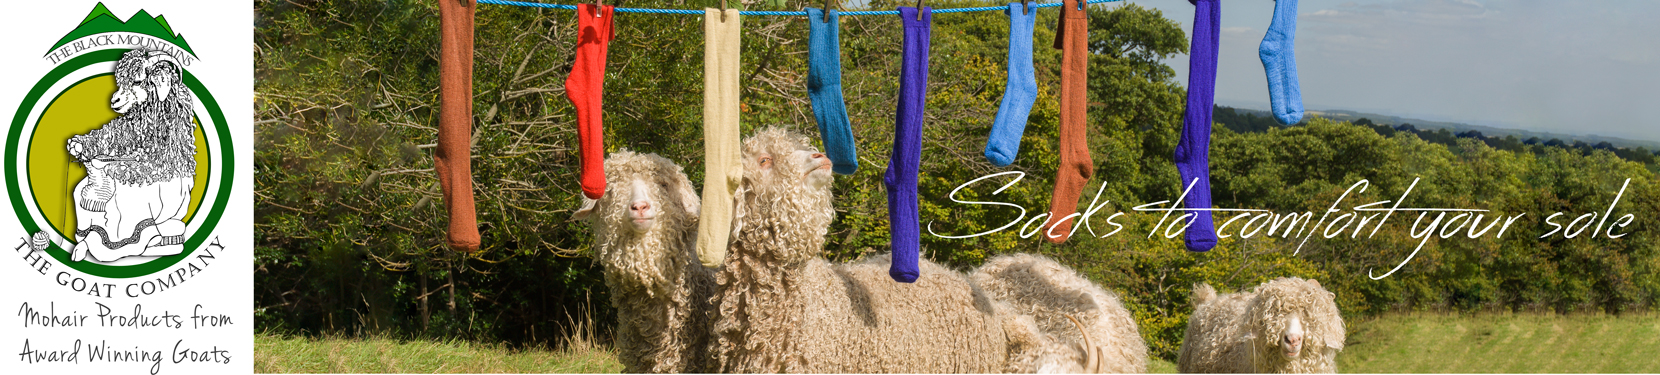 Sustainable Mohair Socks and other products from The Goat Company